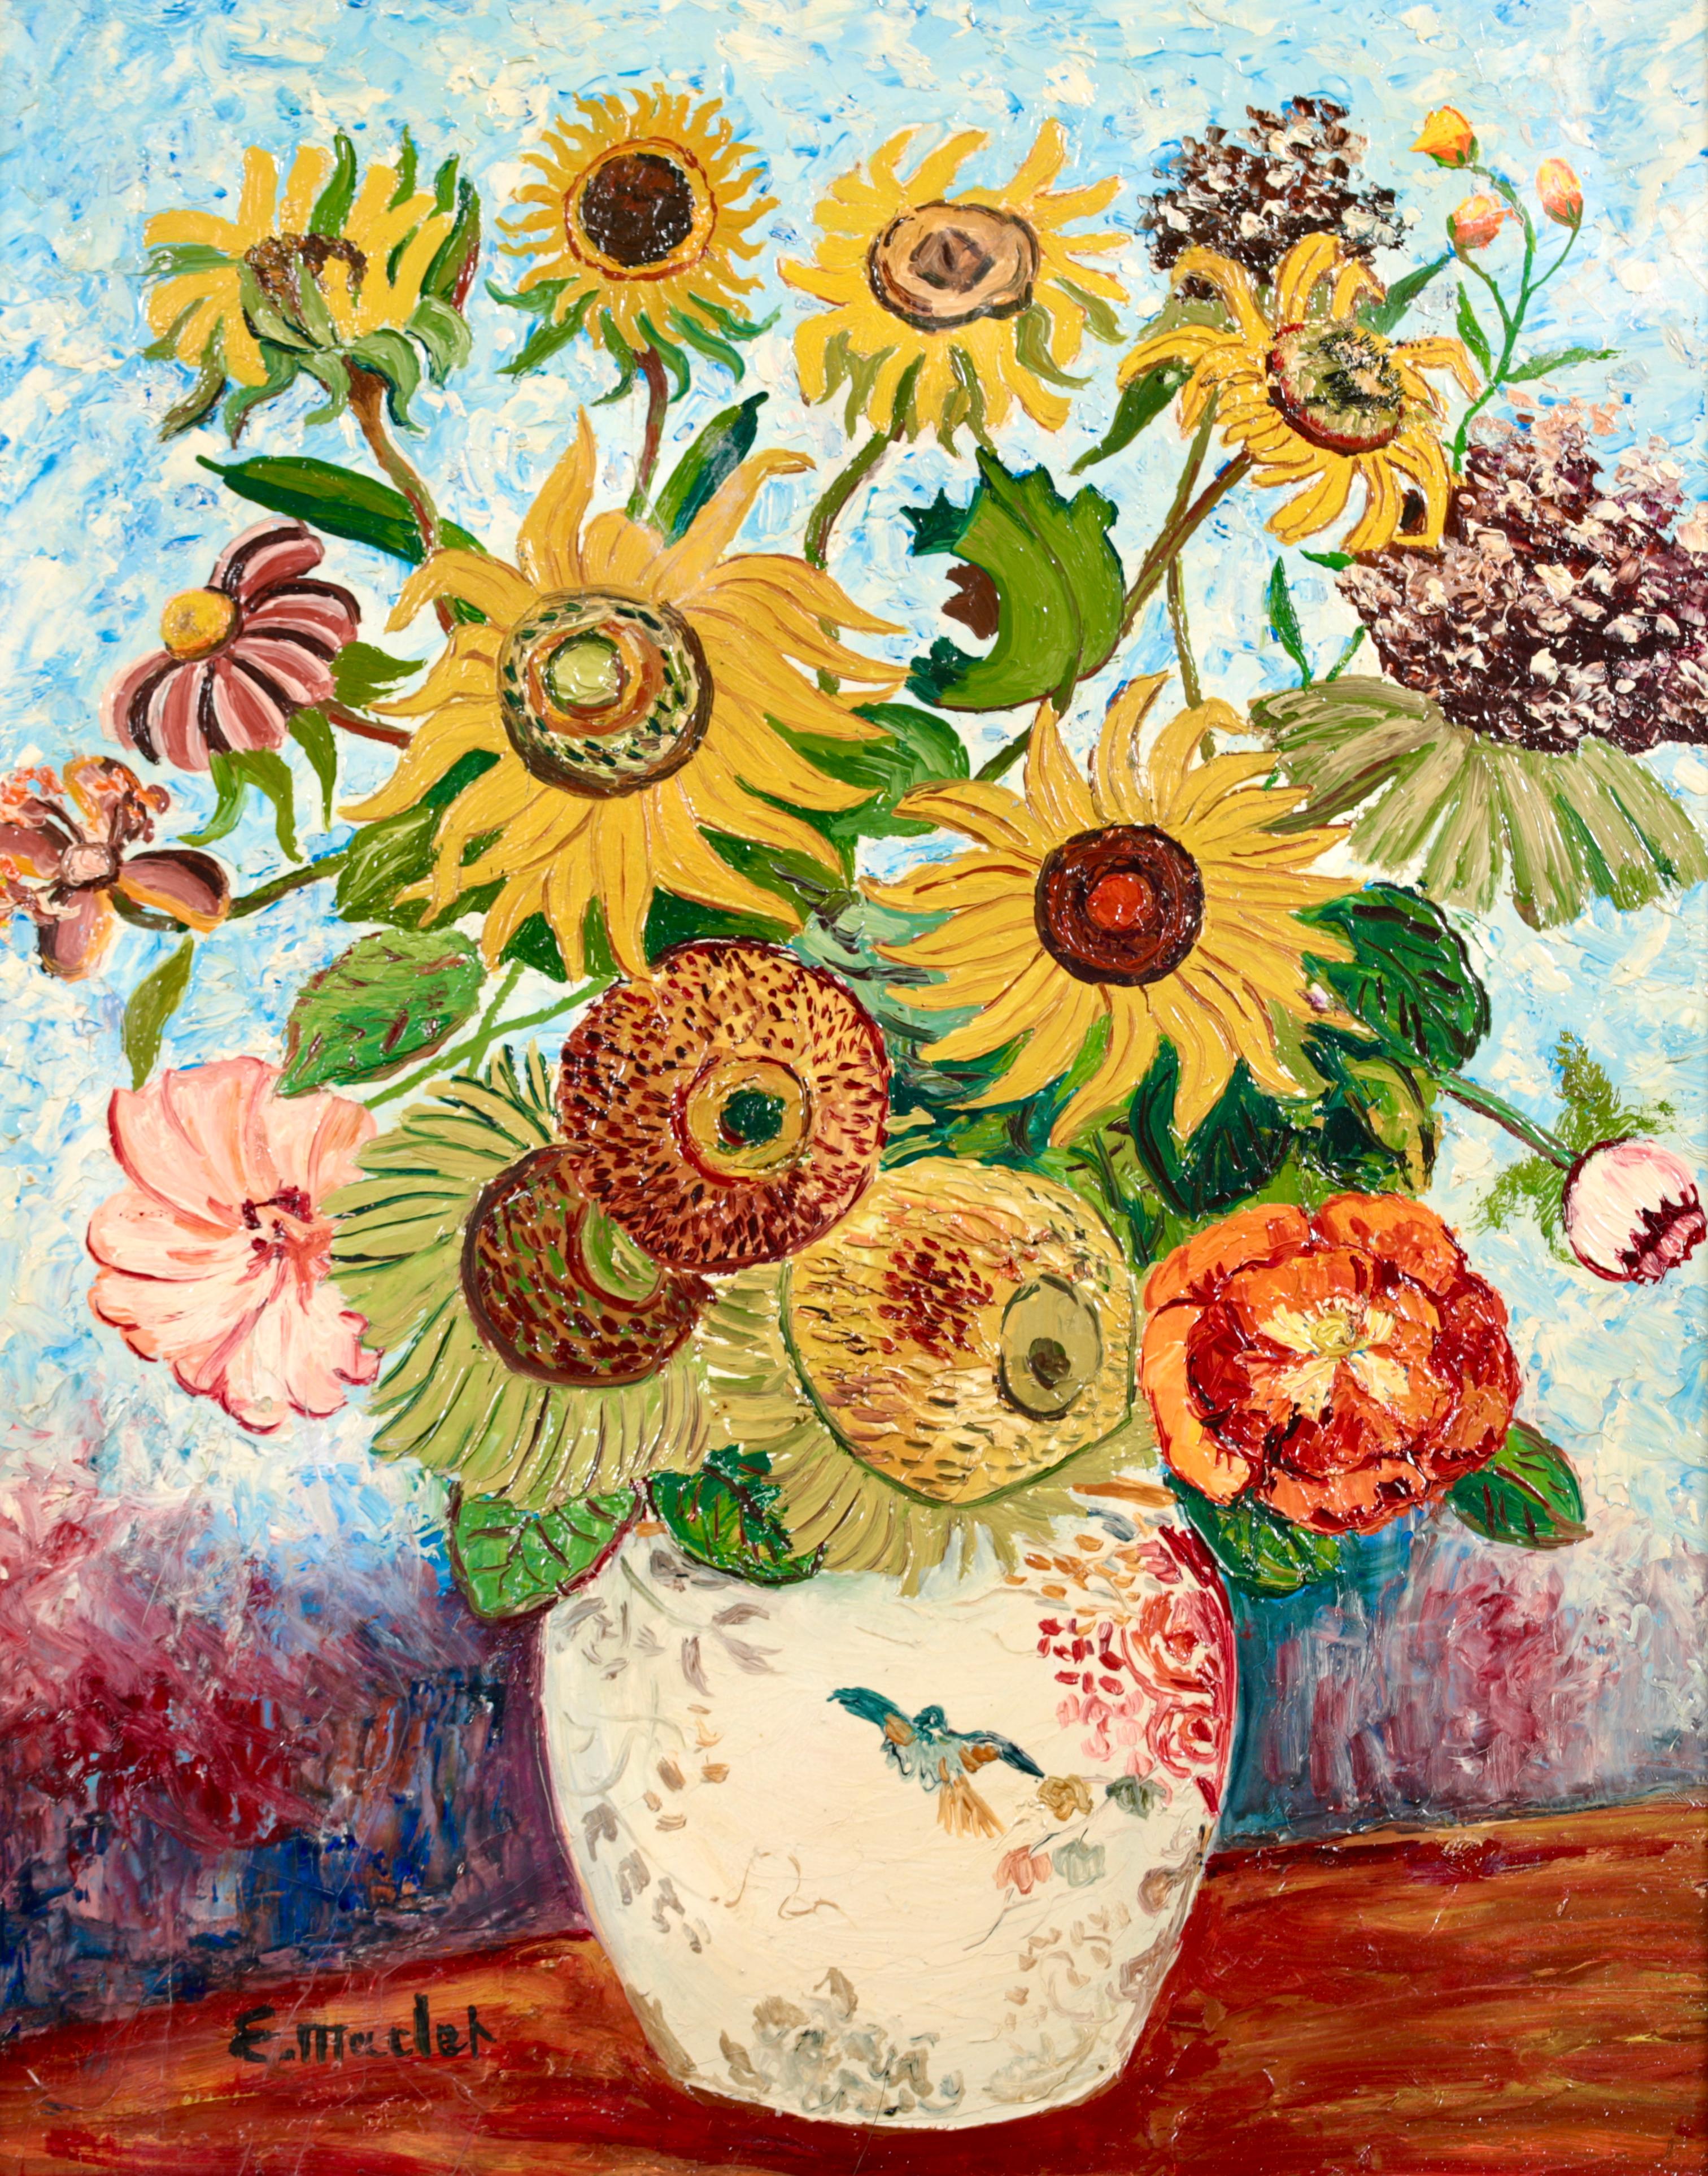 Sunflowers - Impressionist Oil, Still Life Flowers by Elisee Maclet - Painting by Elisée Maclet